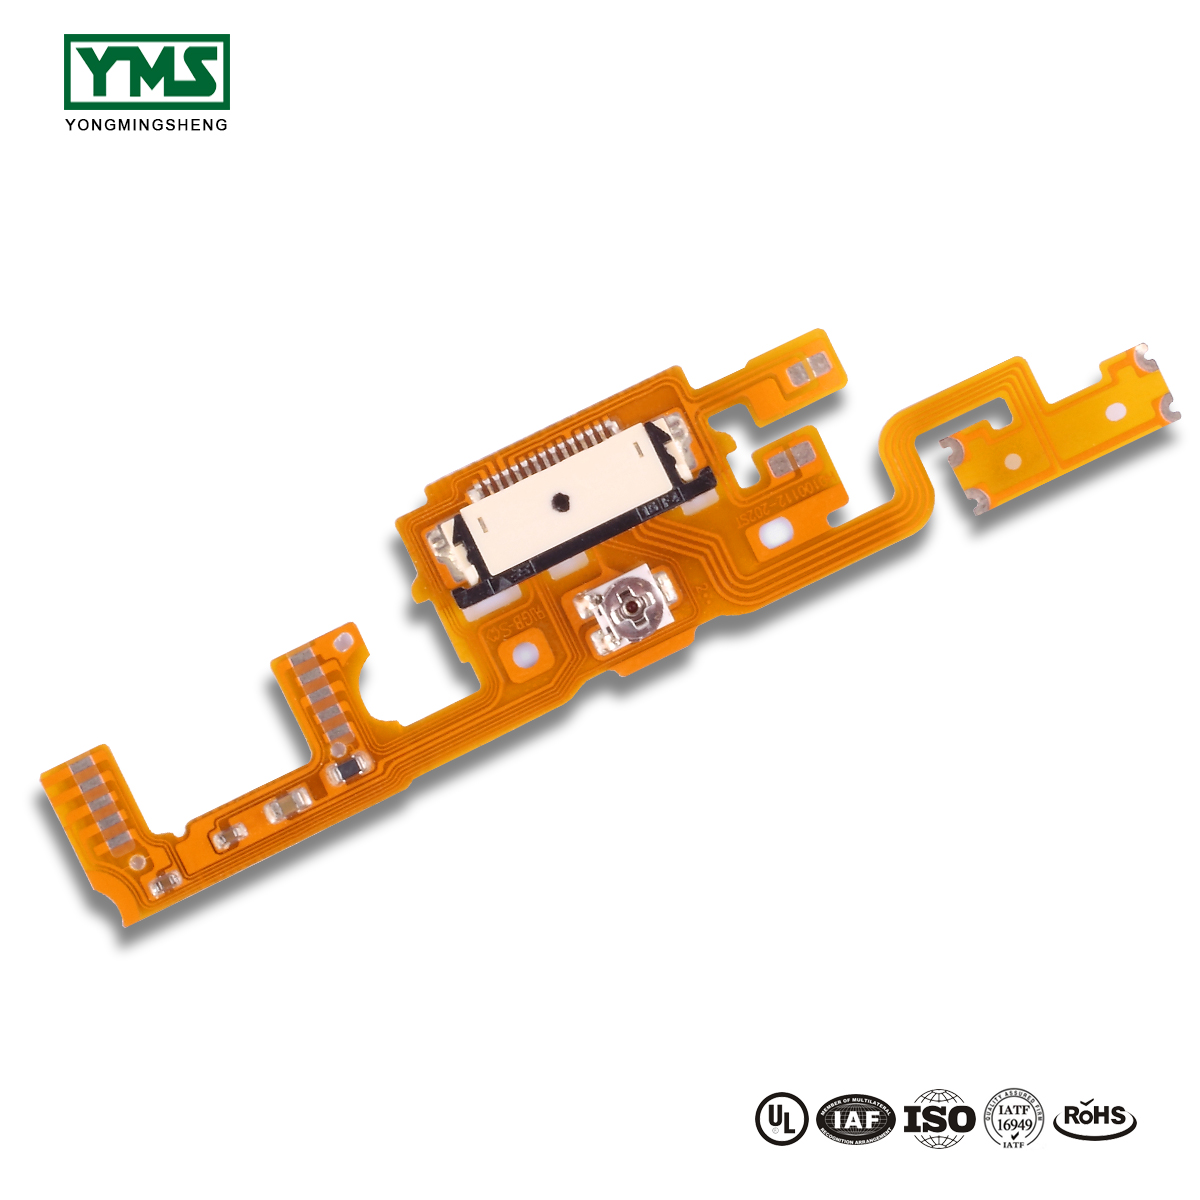 Europe style for Ceramic Cooling & Heating Series Pcb - 1Layer Flexible Board | YMSPCB – Yongmingsheng